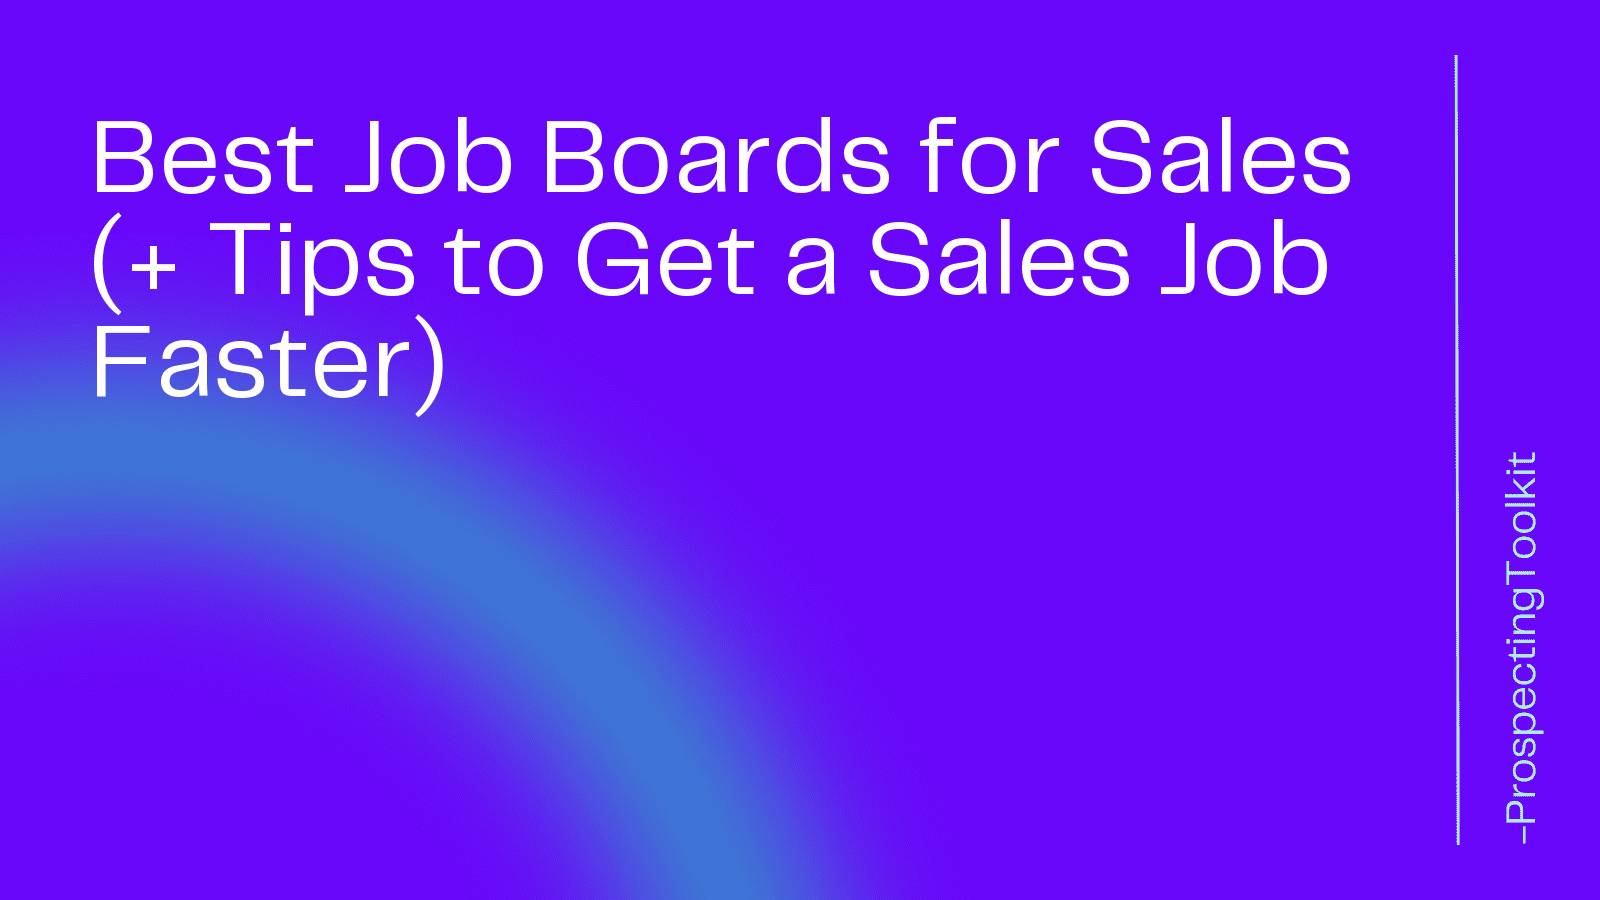 Best Job Boards for Sales (+ Tips to Get a Sales Job Faster)